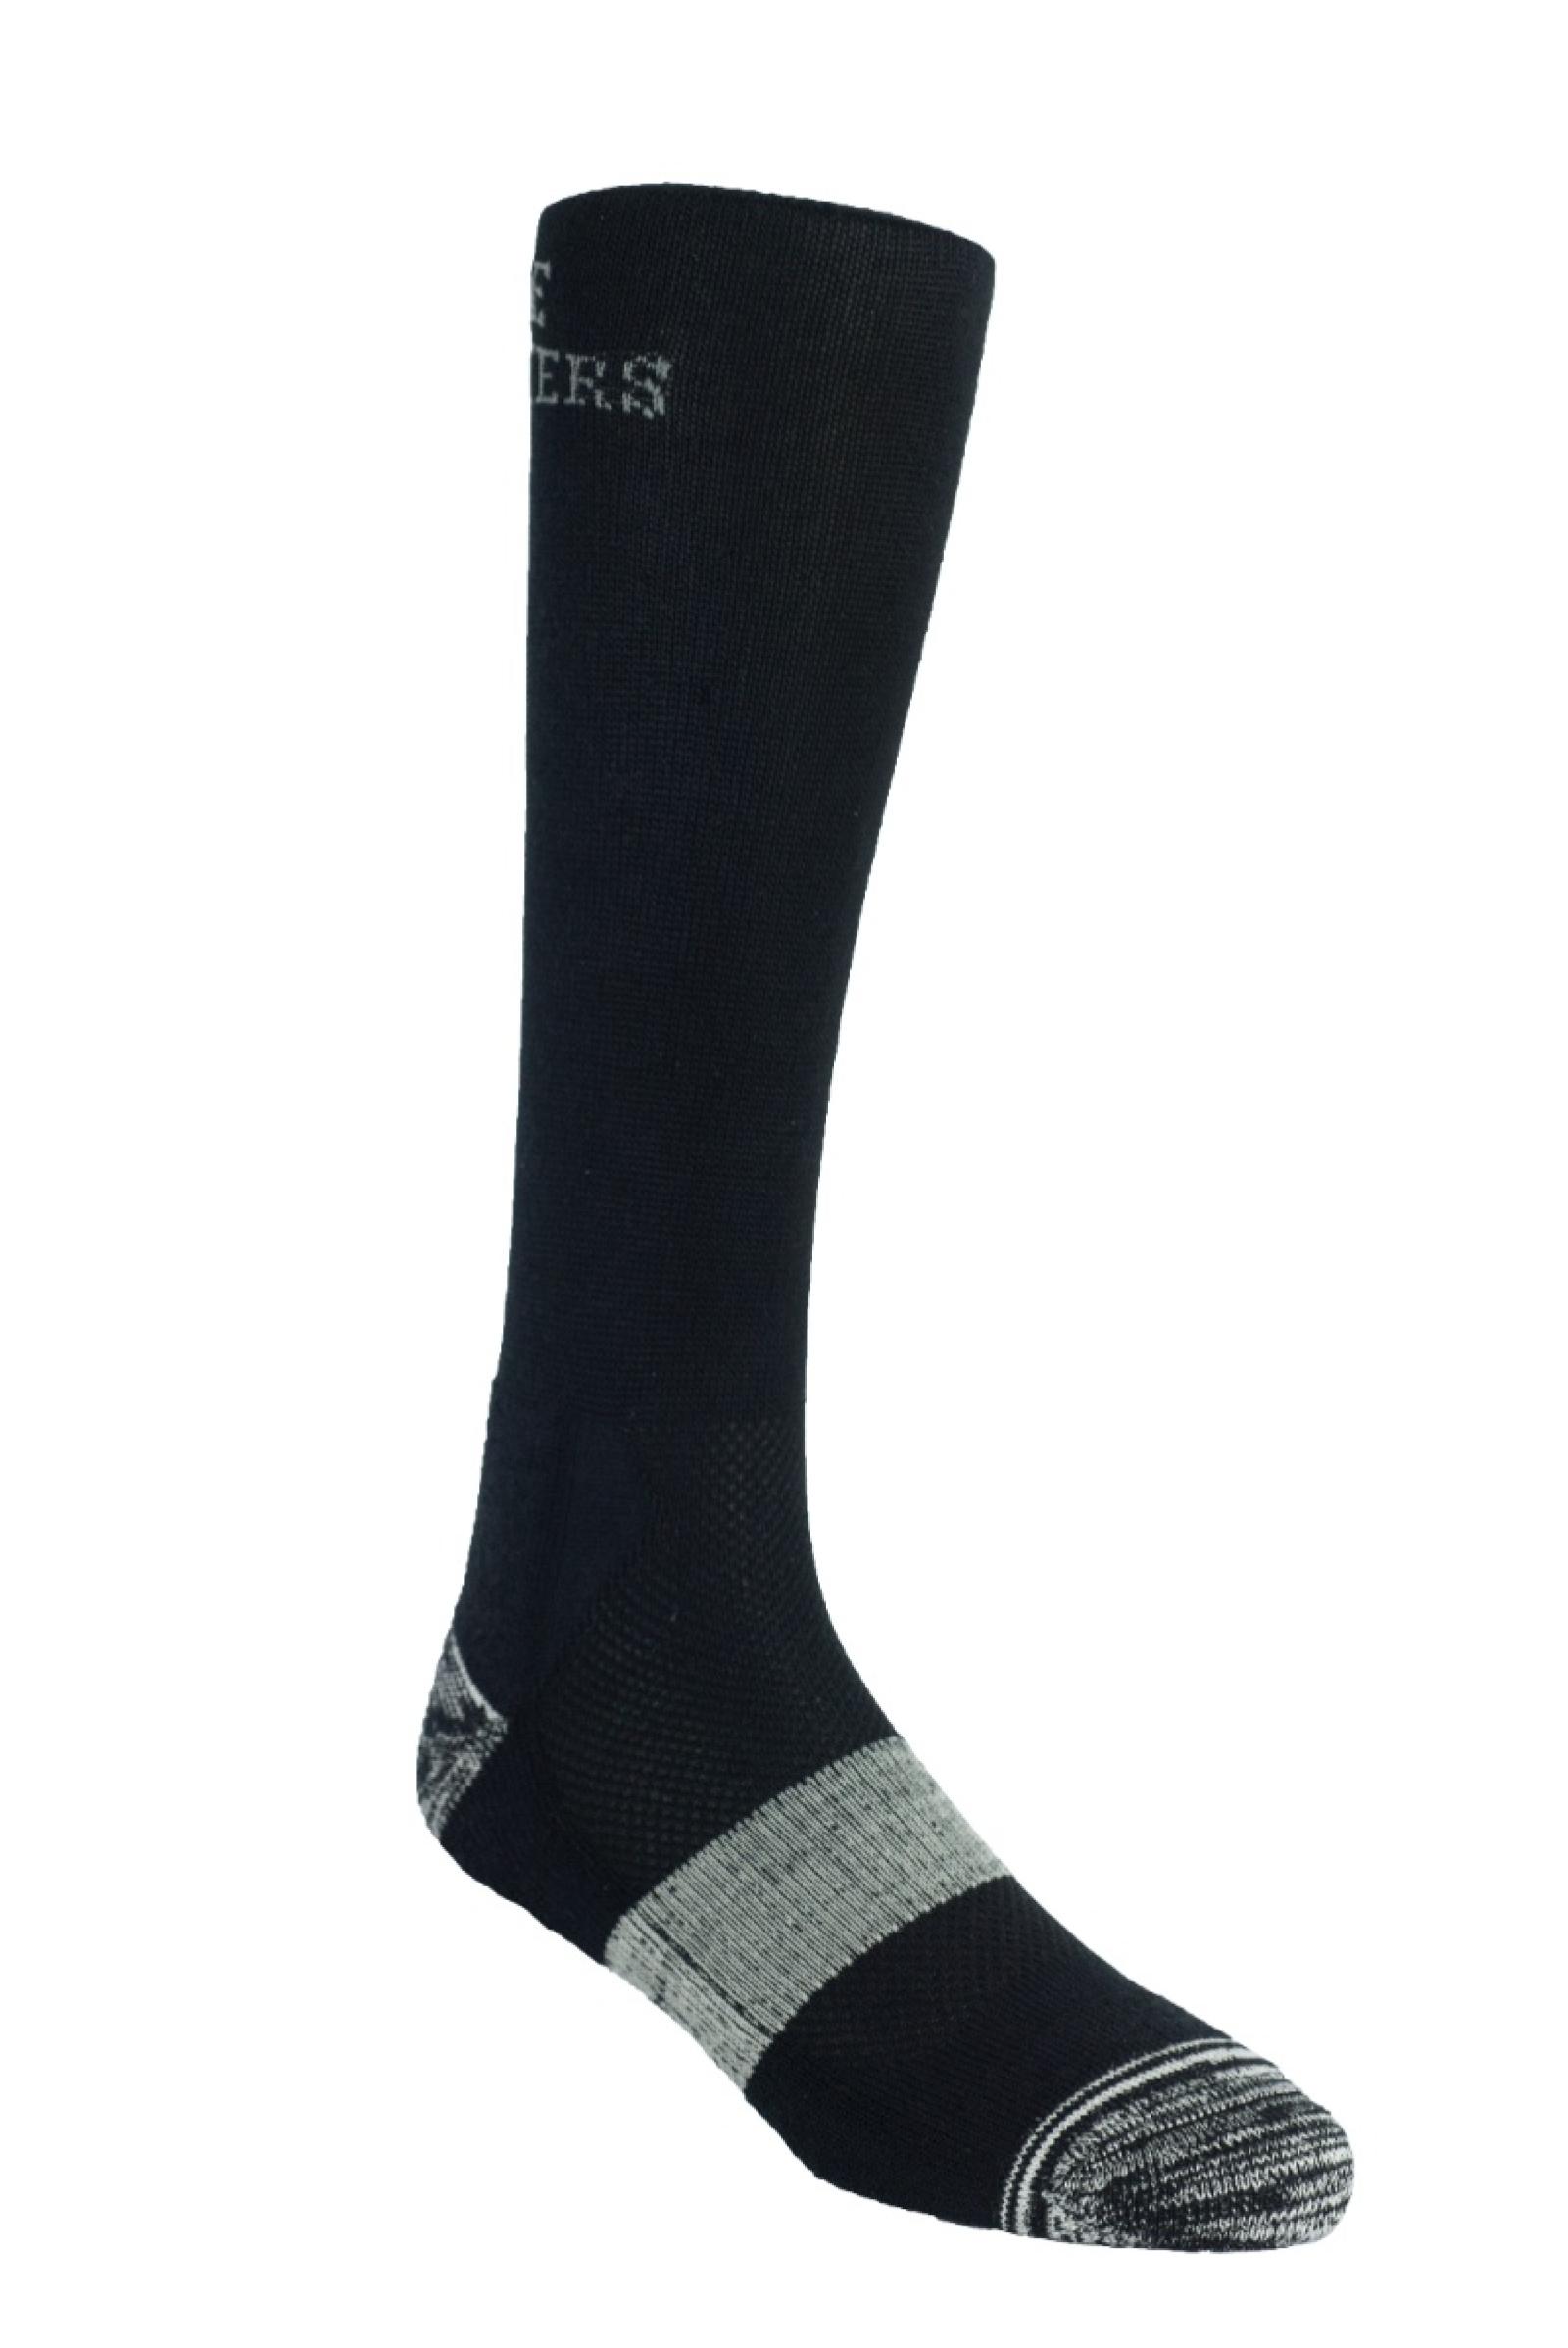 Noble Outfitters Best Dang Boot Sock